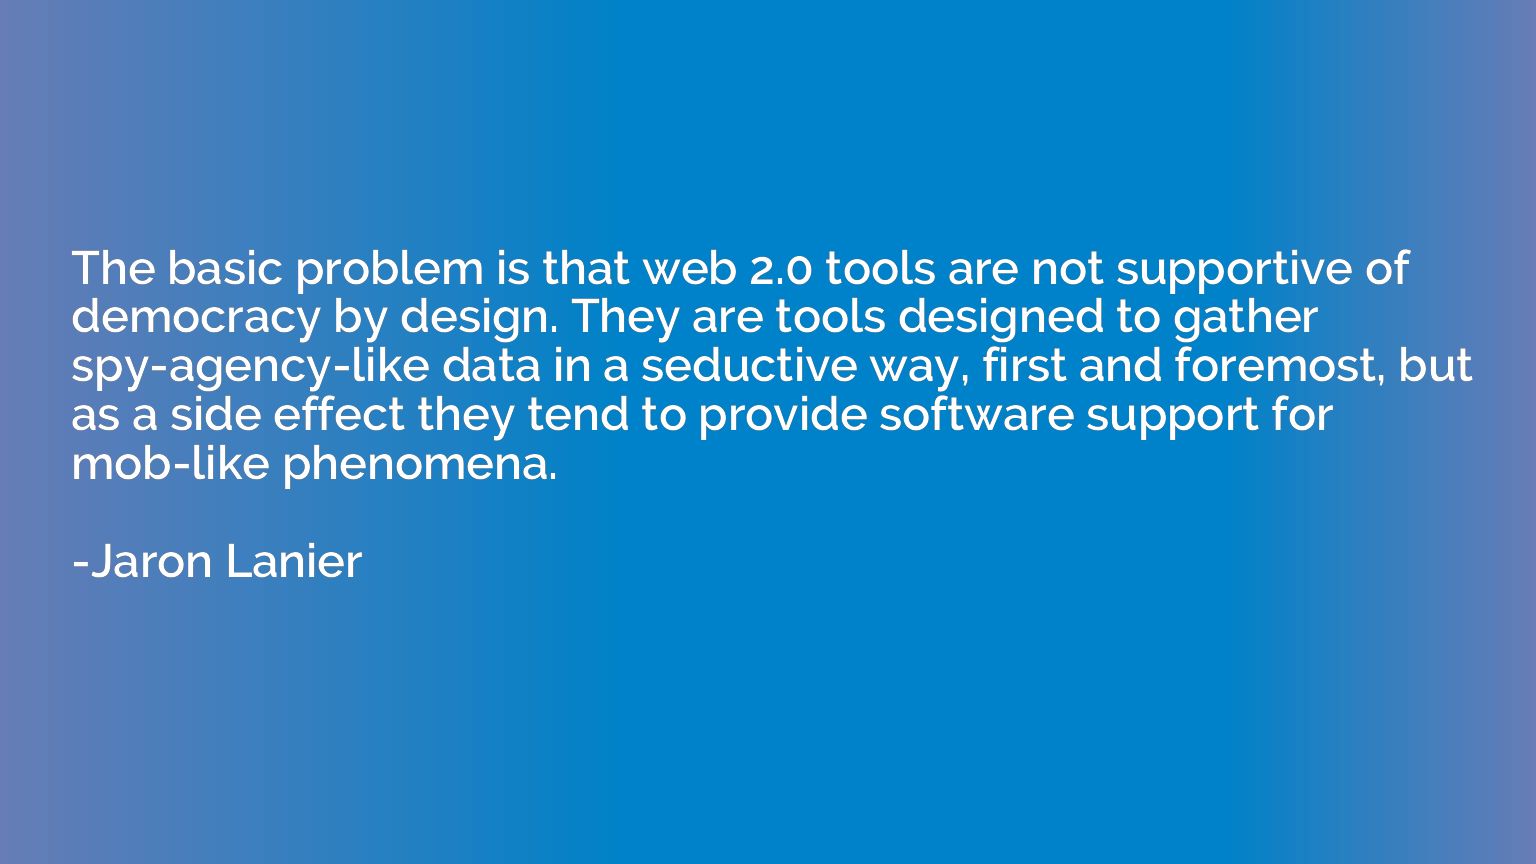 The basic problem is that web 2.0 tools are not supportive o